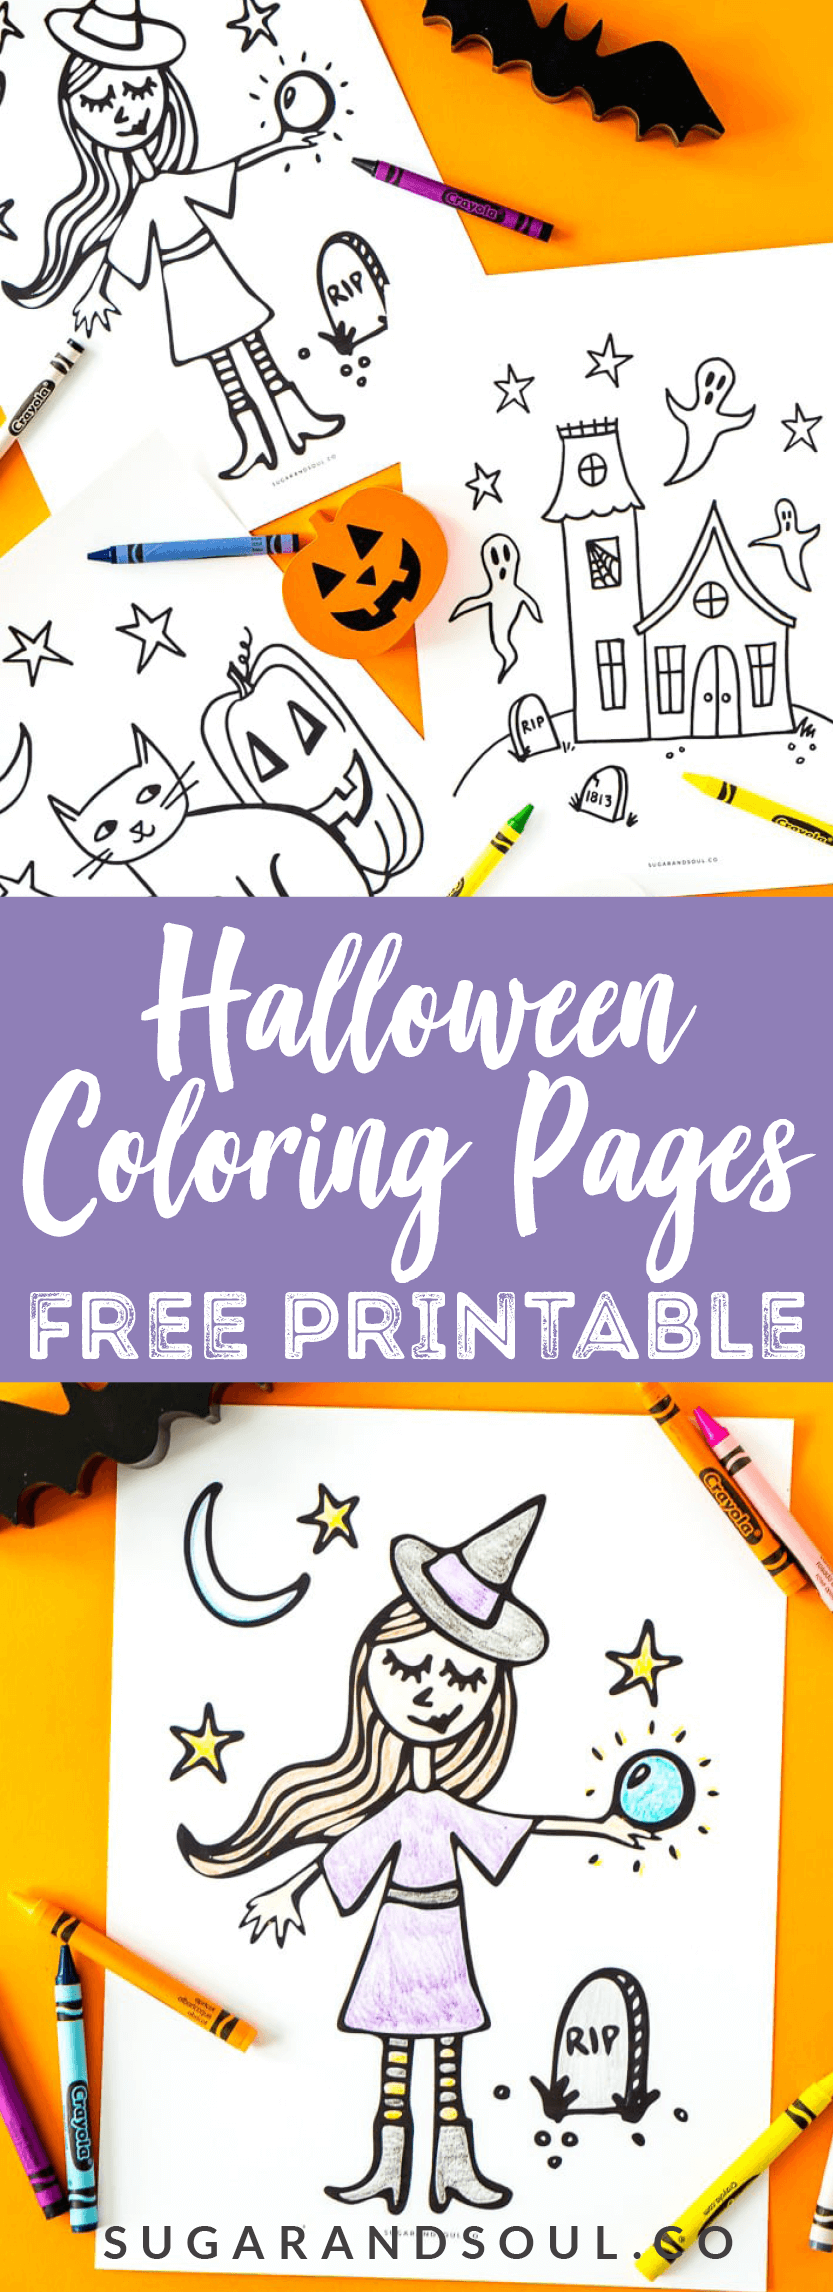 These Free Halloween Coloring Pages are an easy way to add entertainment to the spookiest month of the year! Print them right at home and let your kids color! via @sugarandsoulco